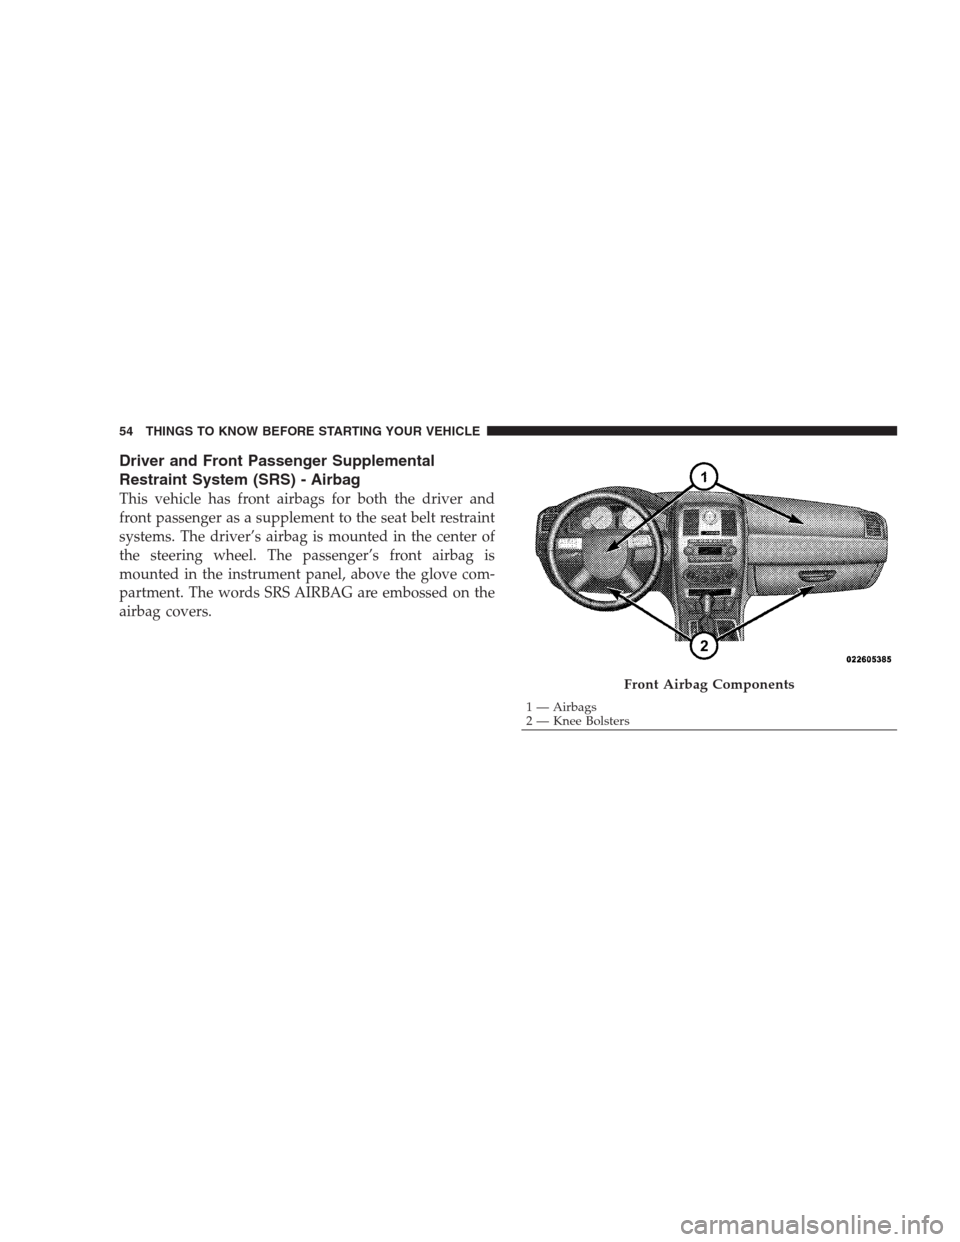 CHRYSLER 300 C 2009 1.G Owners Manual Driver and Front Passenger Supplemental
Restraint System (SRS) - Airbag
This vehicle has front airbags for both the driver and
front passenger as a supplement to the seat belt restraint
systems. The d